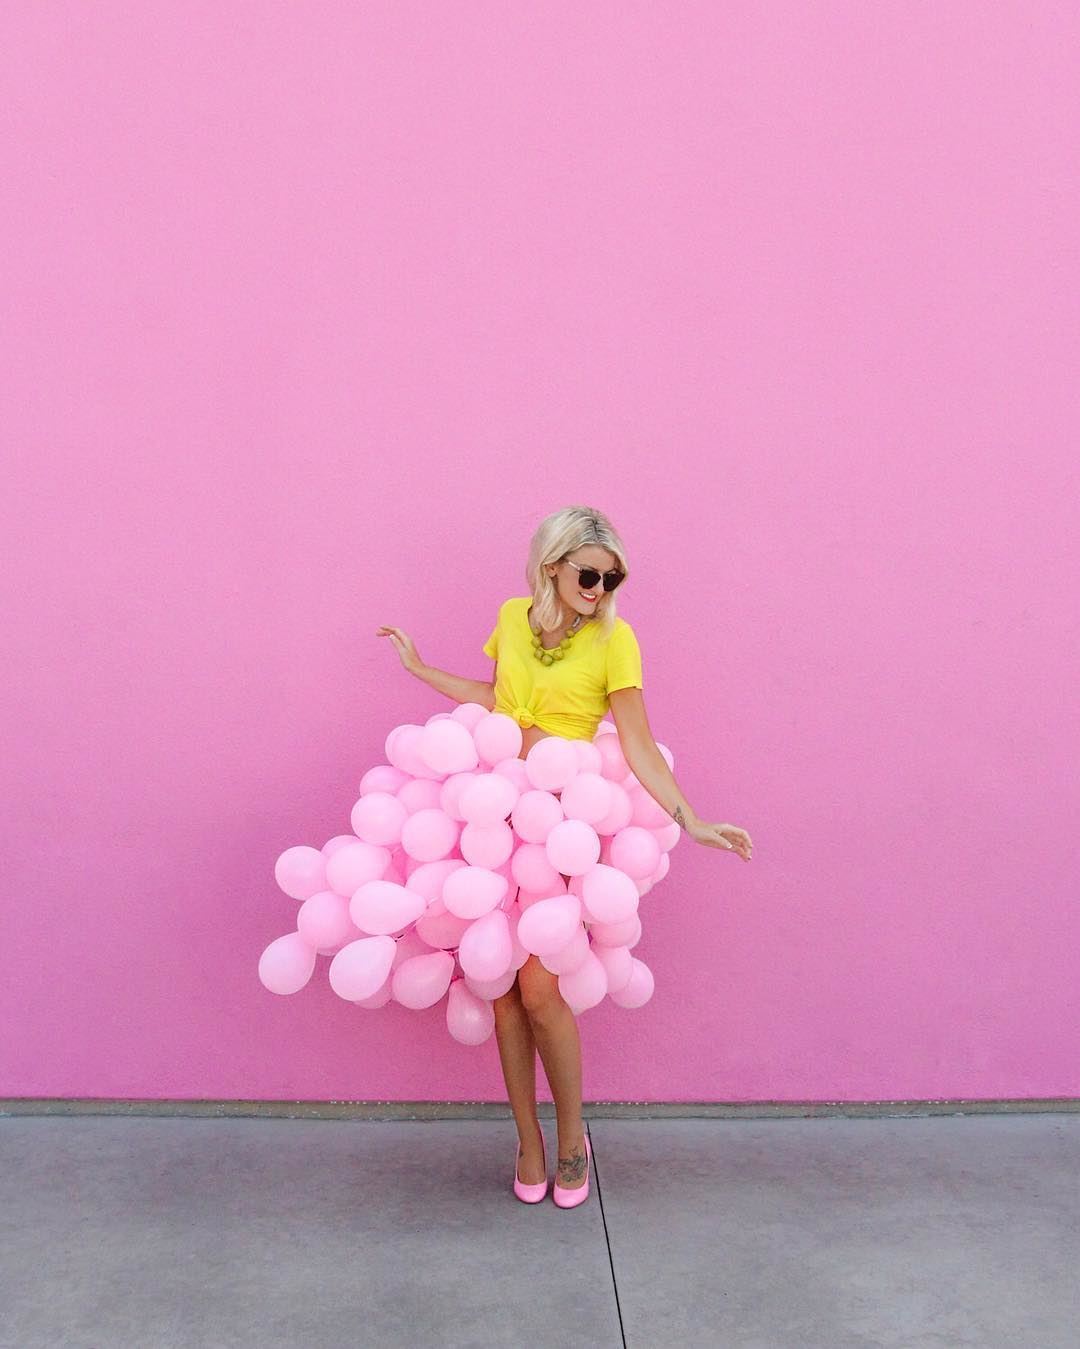 5 Creative Colorful Photos made with Balloons